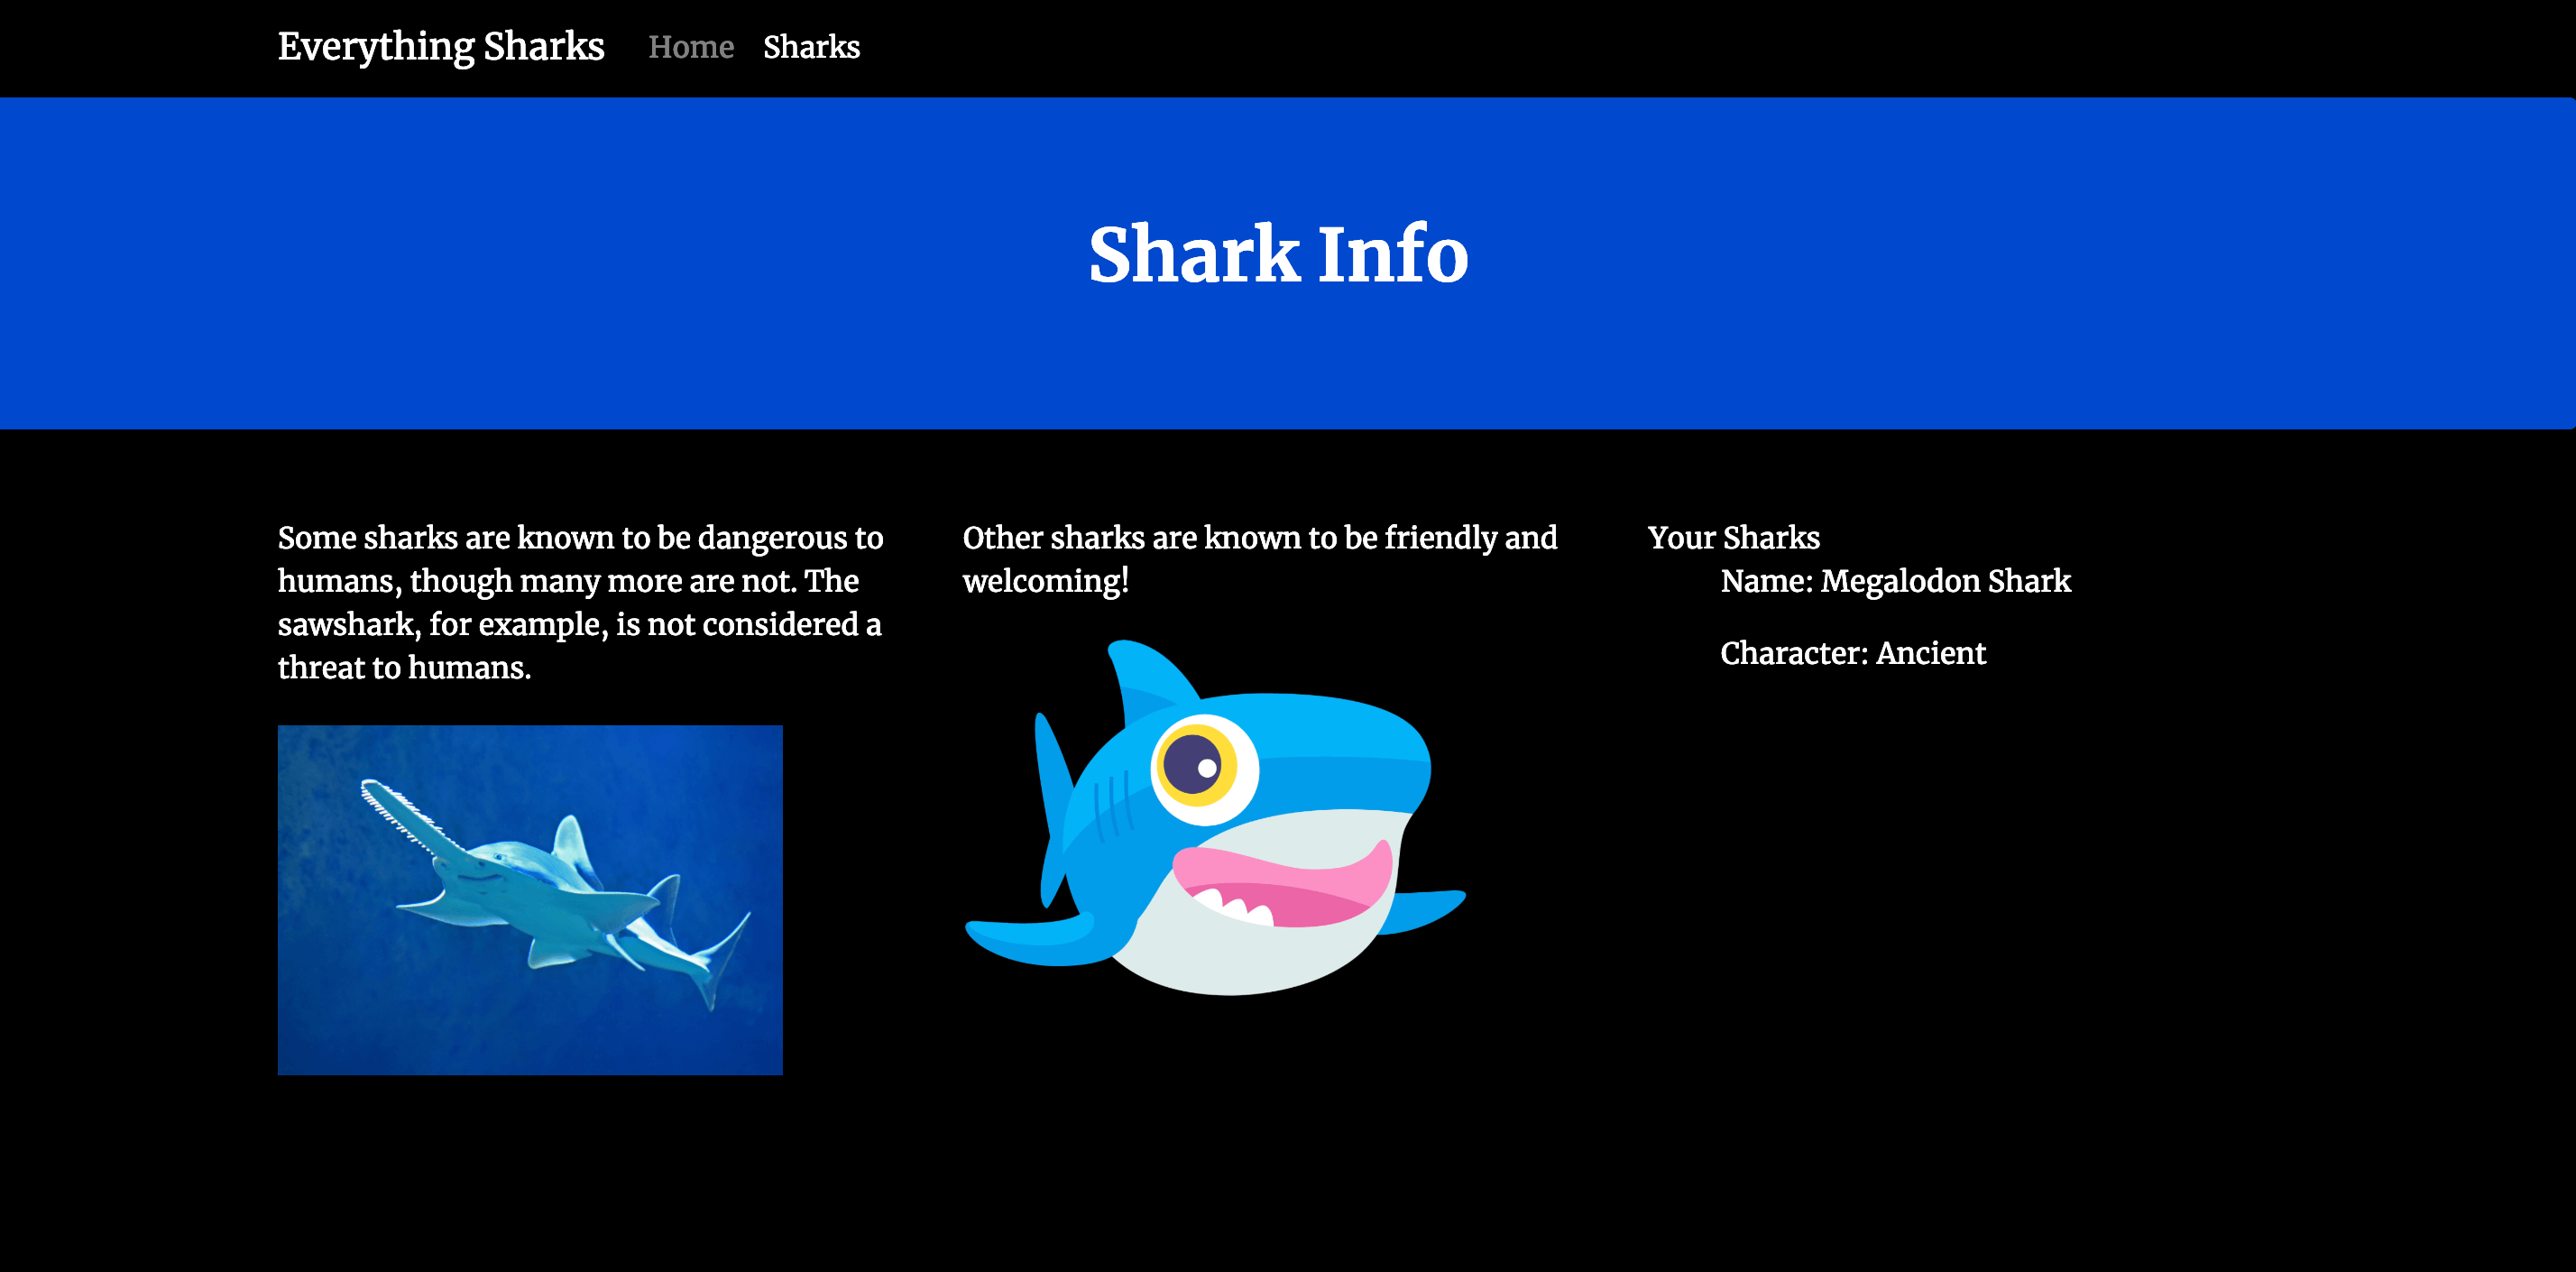 Shark Output from the form you submitted